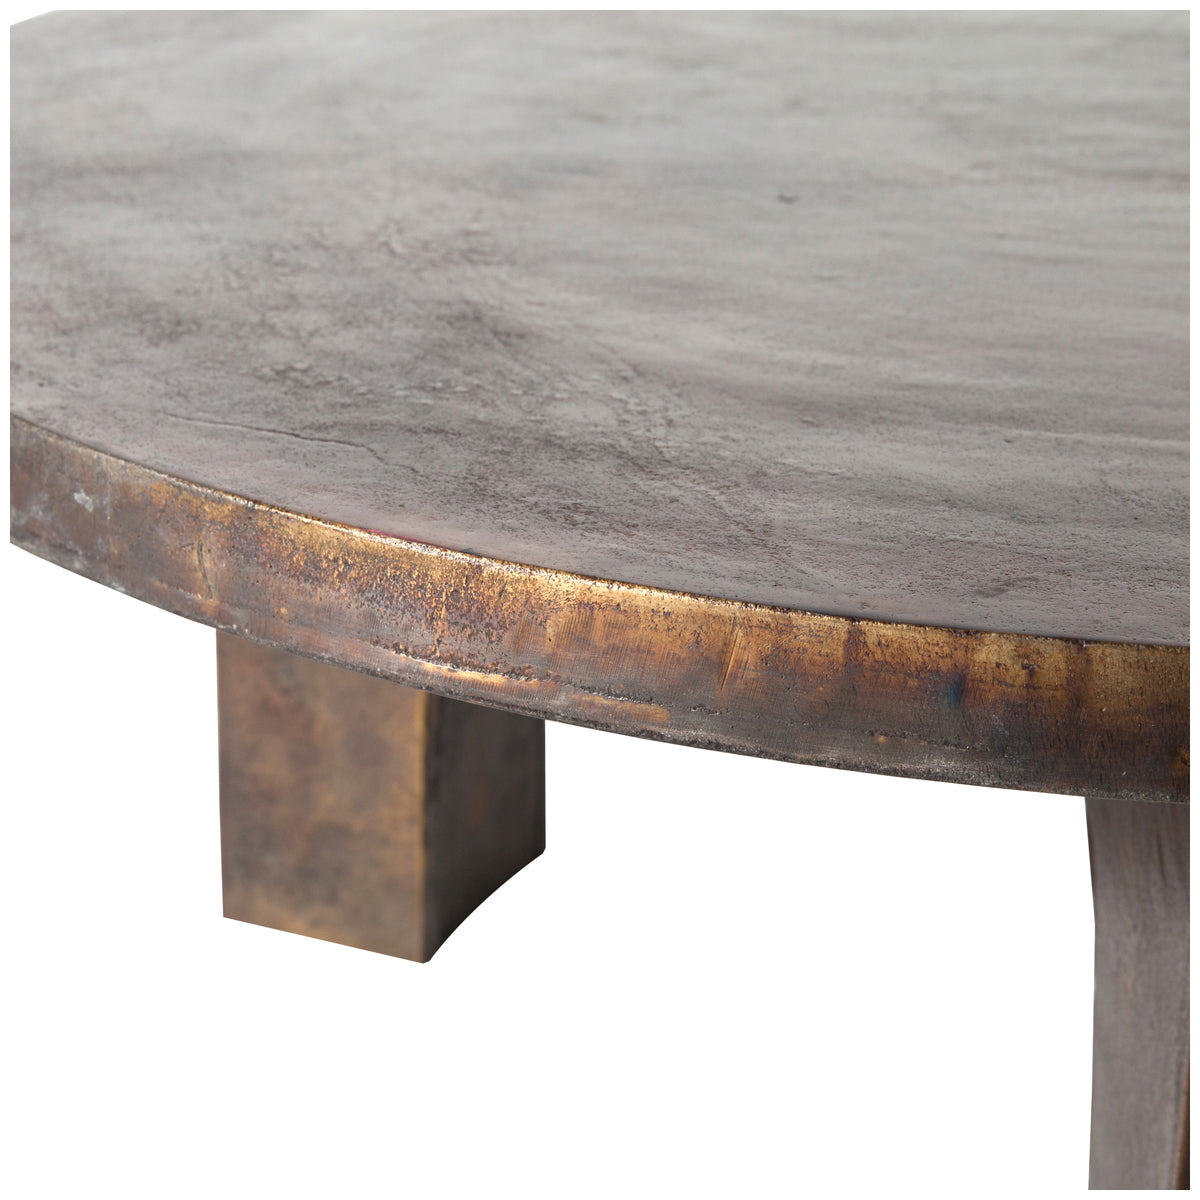 Four Hands Marlow Cruz Coffee Table - Antique Rust